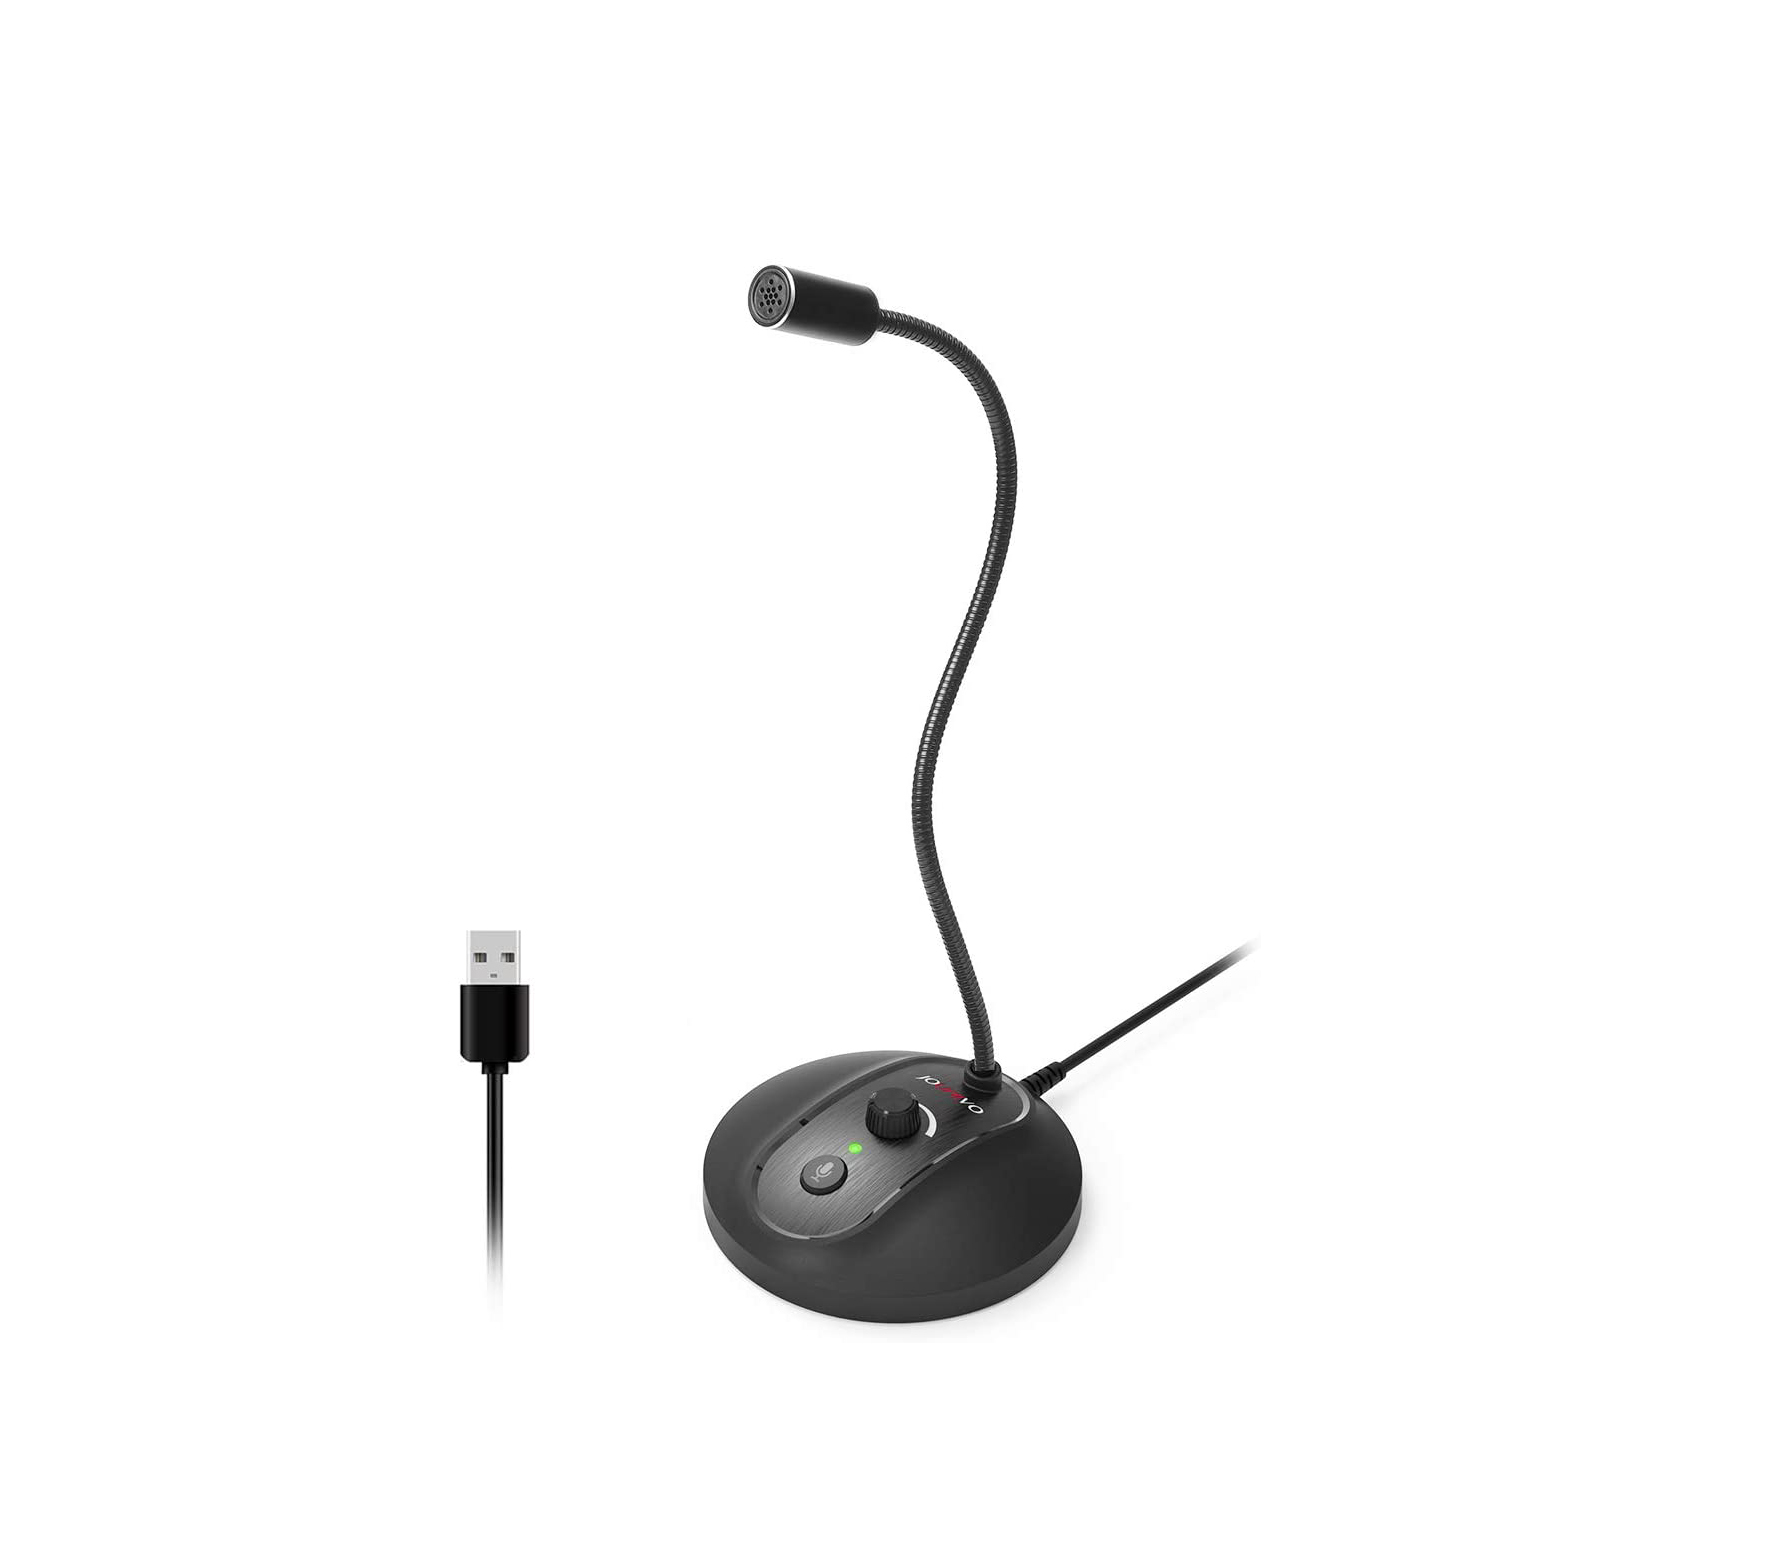  USB Computer Microphone with Mute Button, Plug&Play